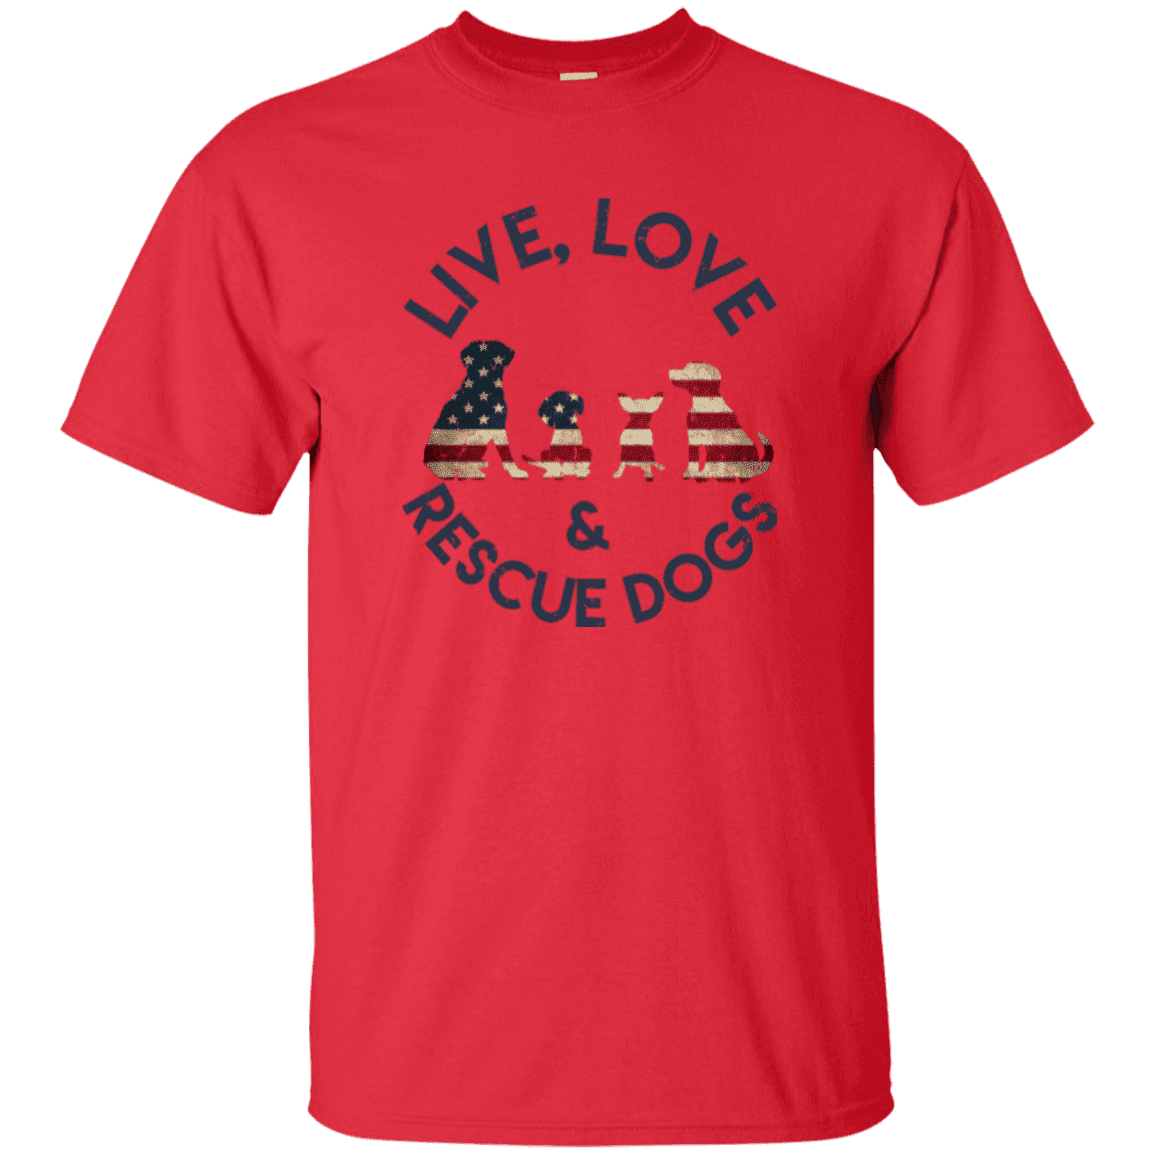 Live Love and Rescue Dogs - T Shirt.